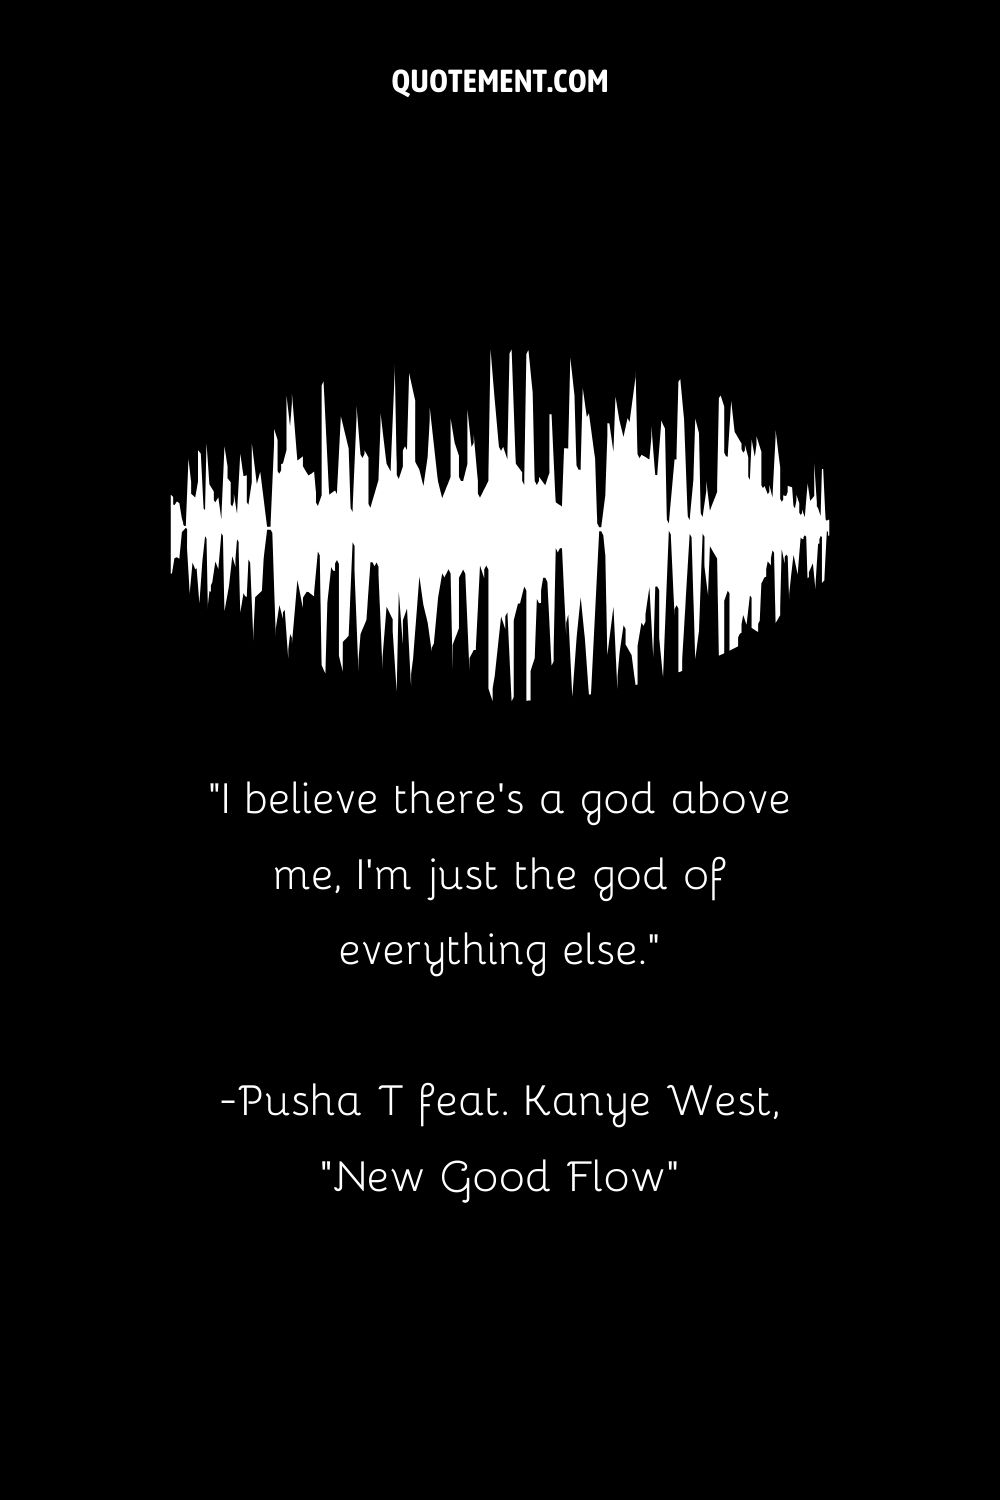 “I believe there’s a god above me, I’m just the god of everything else.” — Pusha T feat. Kanye West, “New Good Flow”